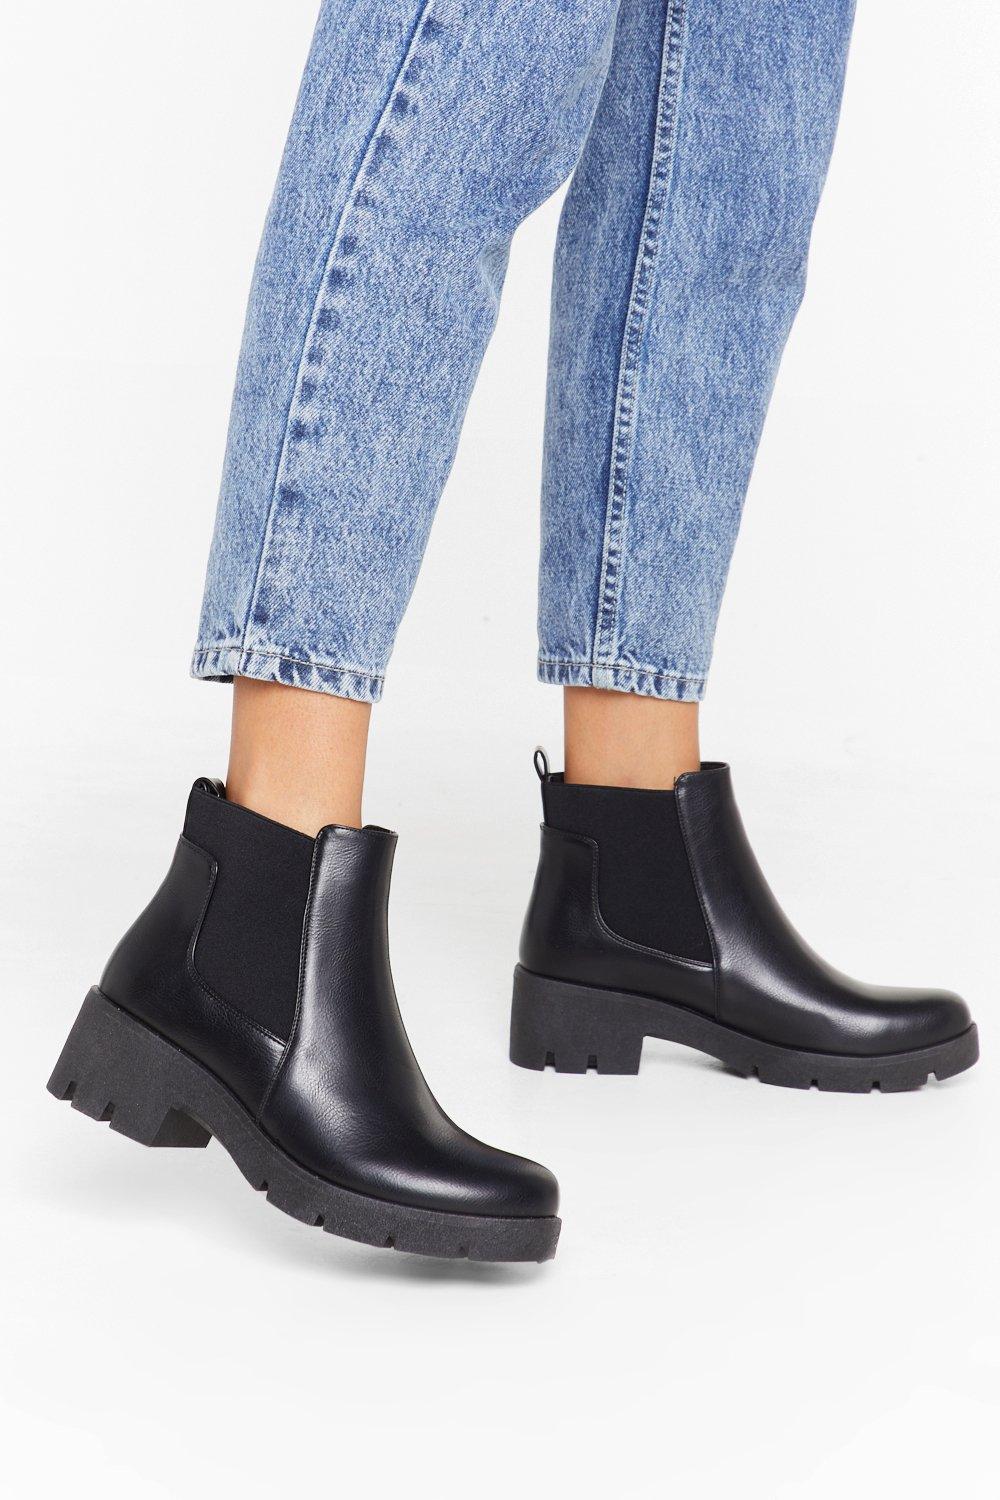 Ankle Boots | Women's Ankle Booties Online 2019 | Nasty Gal